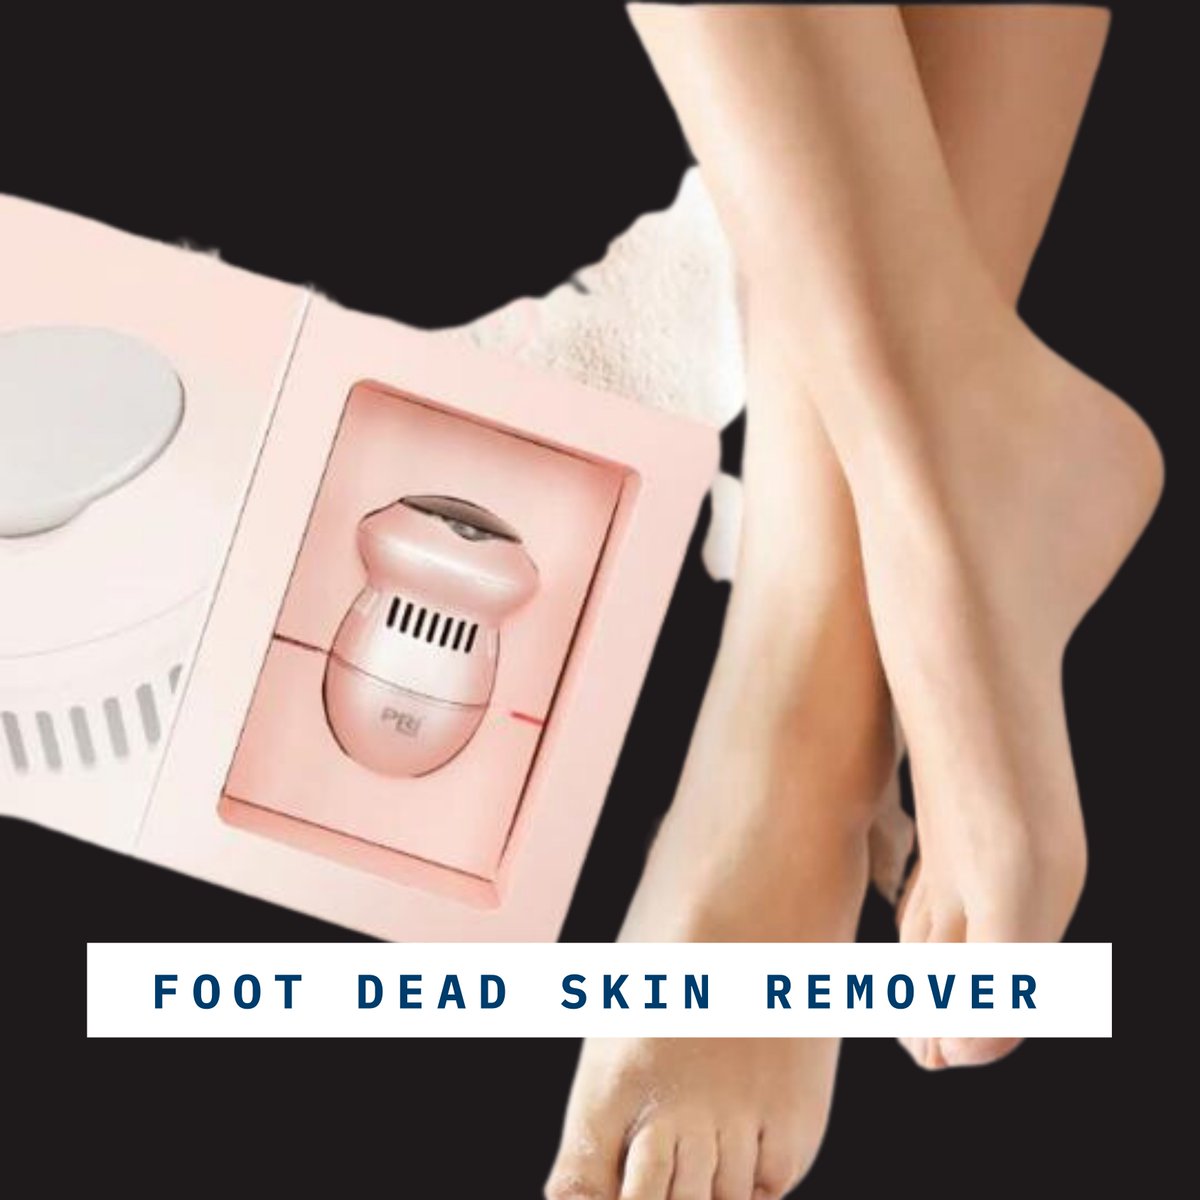 Electric Foot File Grinder Dead Skin Callus Remover Buy Now : cutt.ly/T49NZ3y #footfile #electronics #electricfootfile #footcare #skincare #electricfootgrinder #electricfootfile #footgrinder #softfeet #callusremover #callusremovers #vacuum #vacuuming